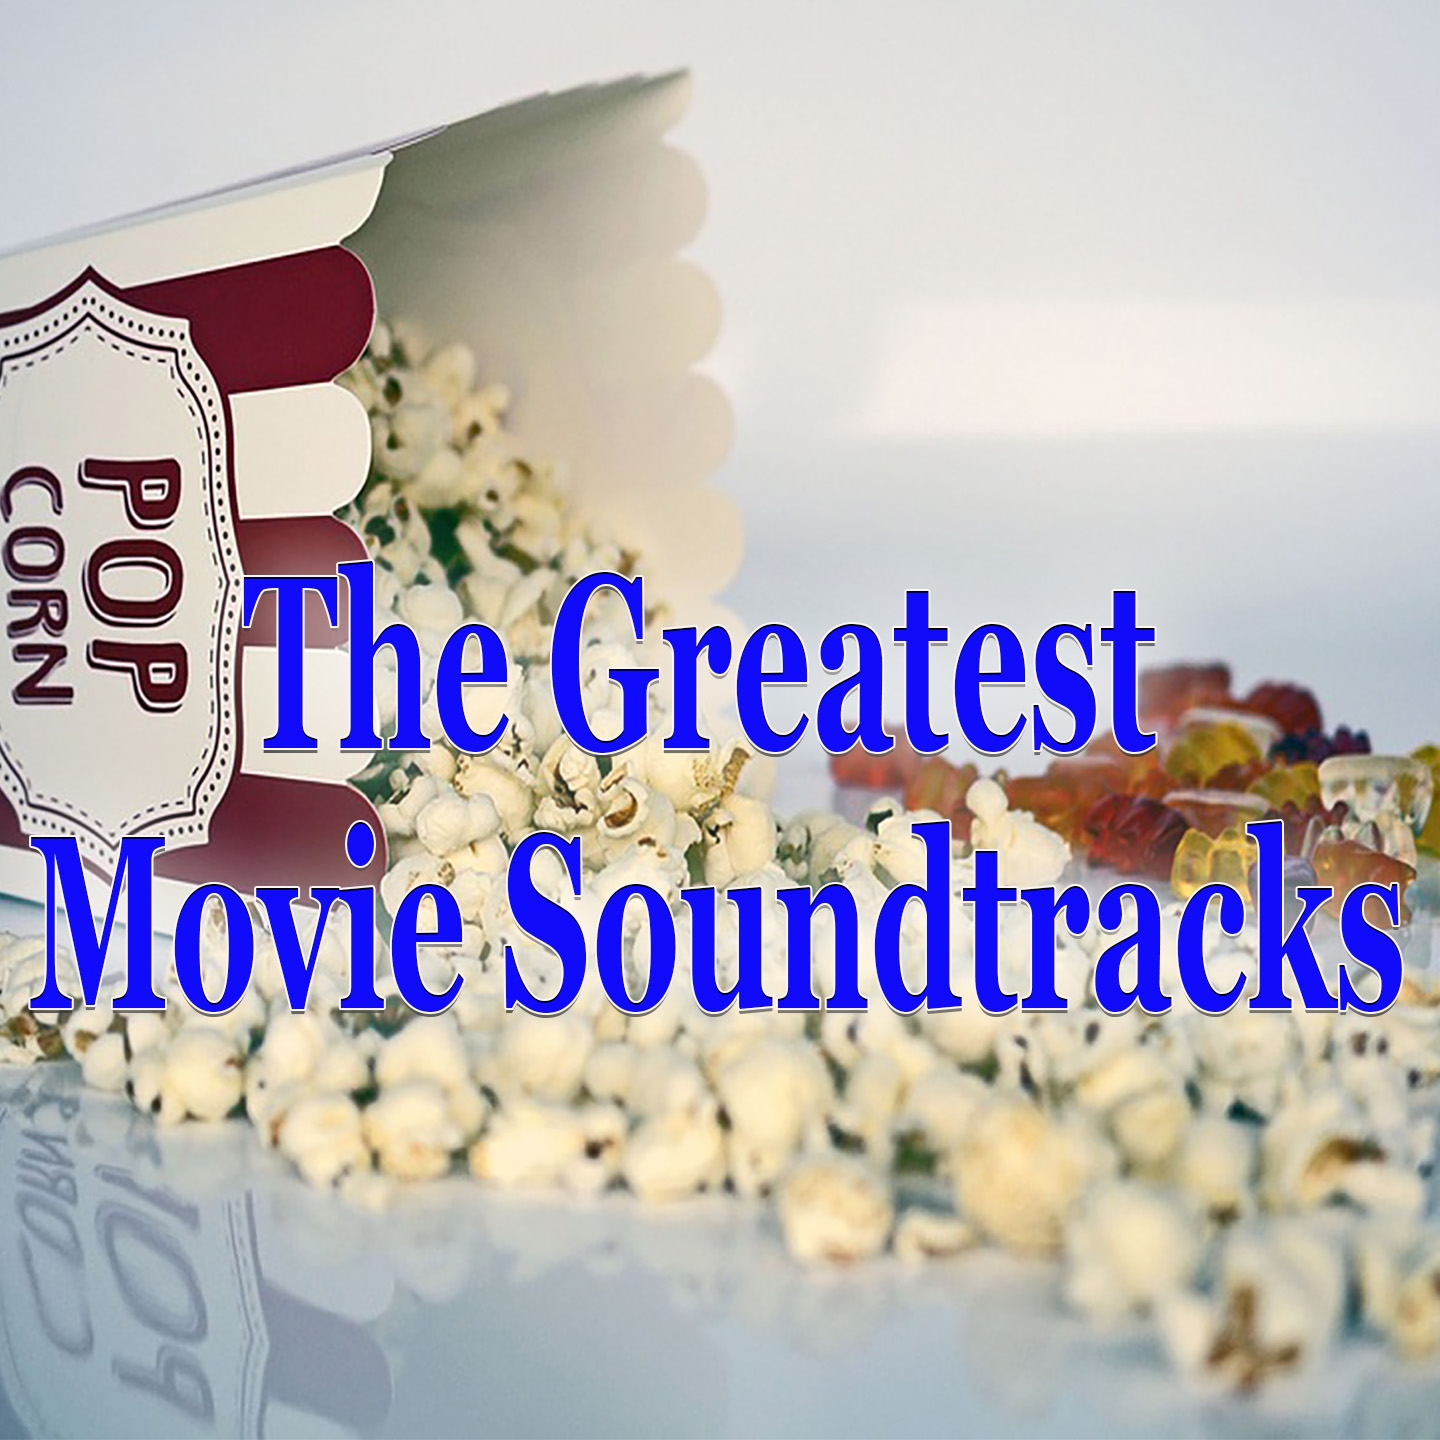 The Greatest Movie Soundtracks (Acoustic Guitar Covers)